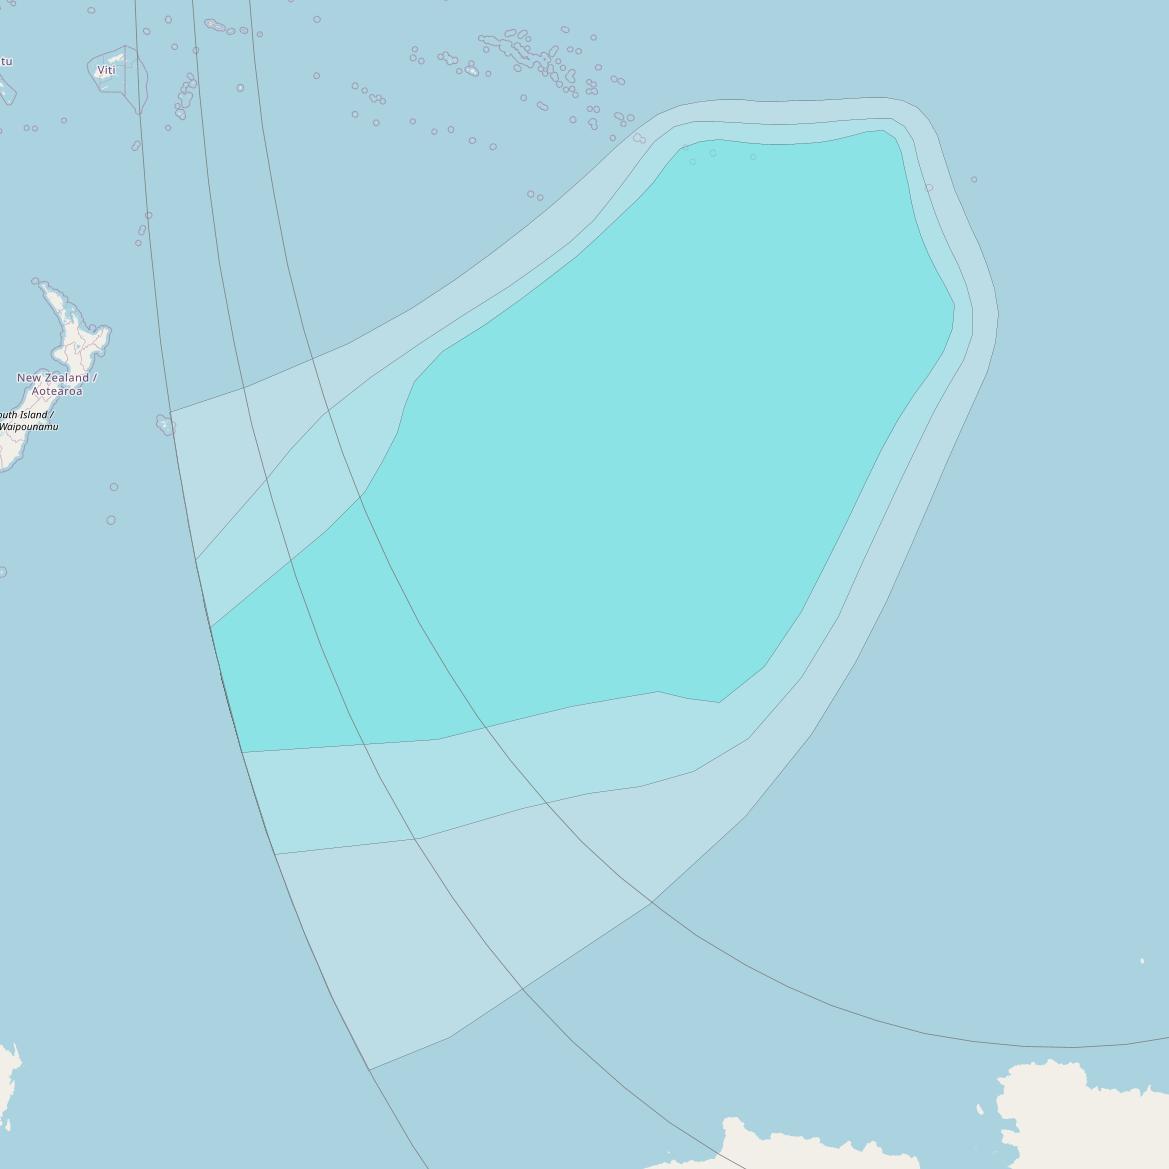 Inmarsat-4F3 at 98° W downlink L-band R013 Regional Spot beam coverage map